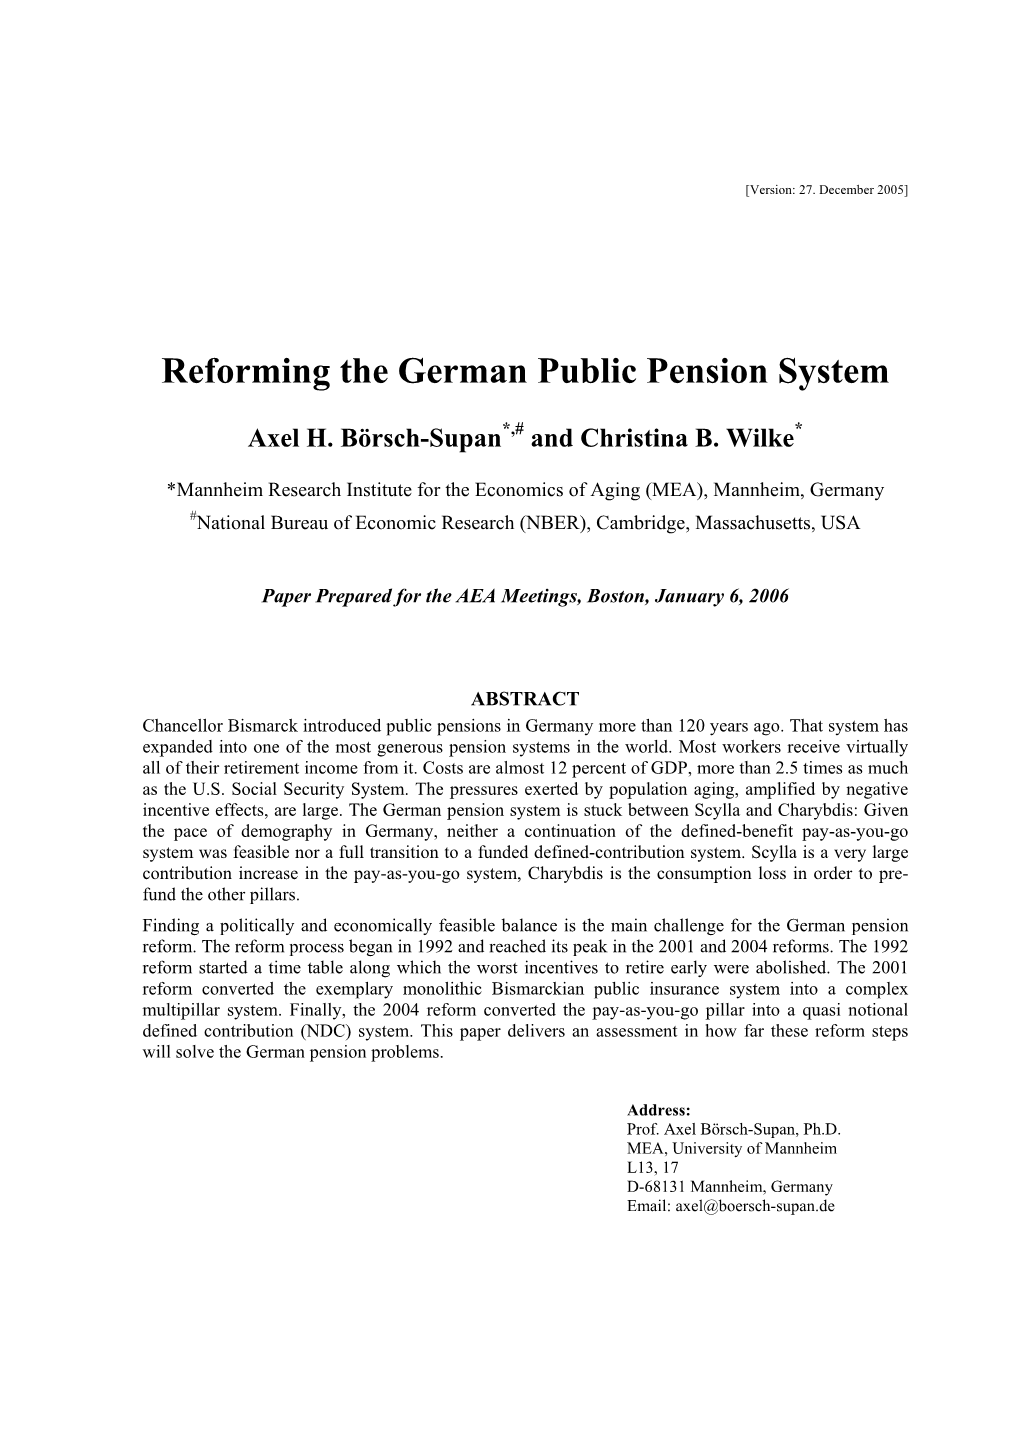 Reforming the German Public Pension System